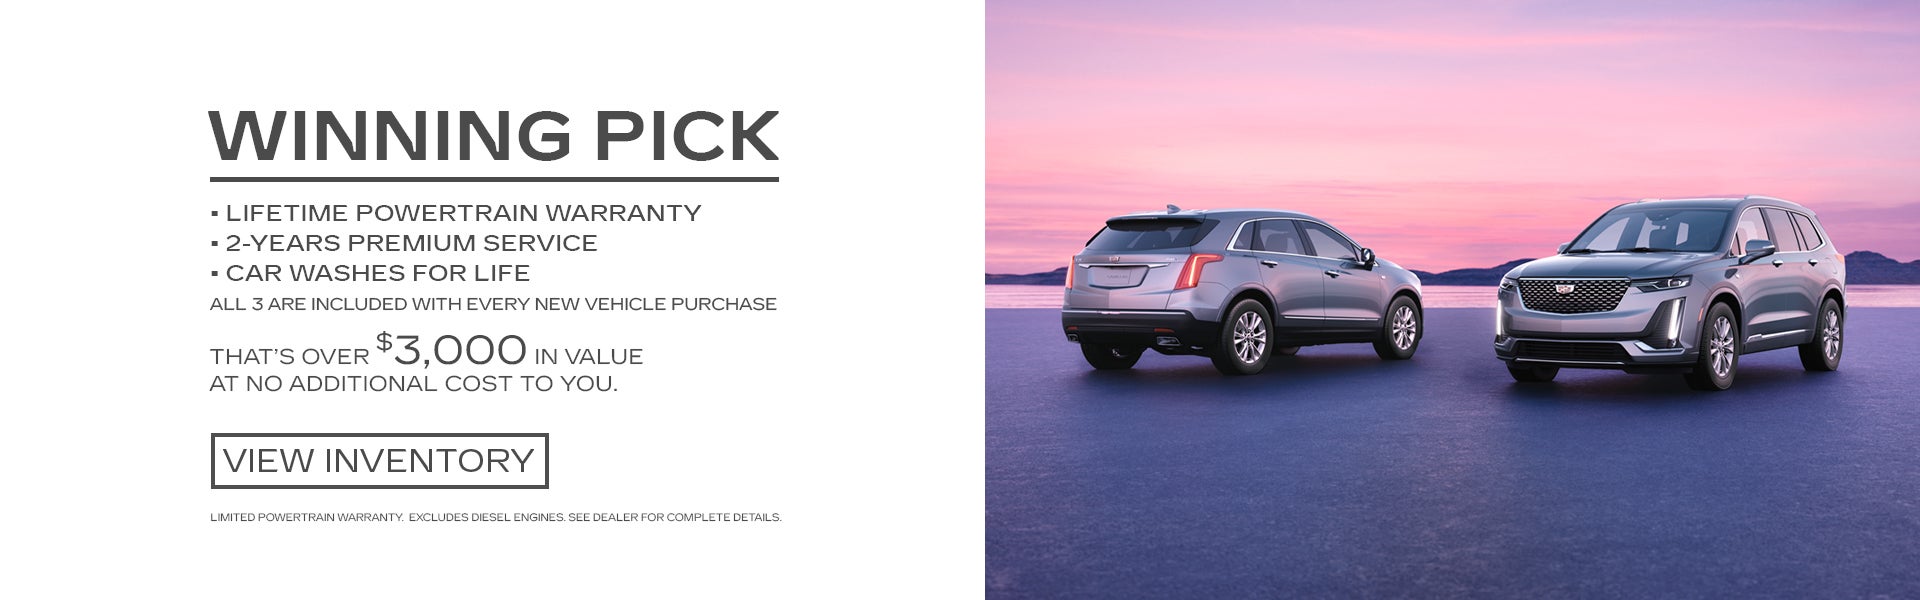 View New Cadillac Inventory